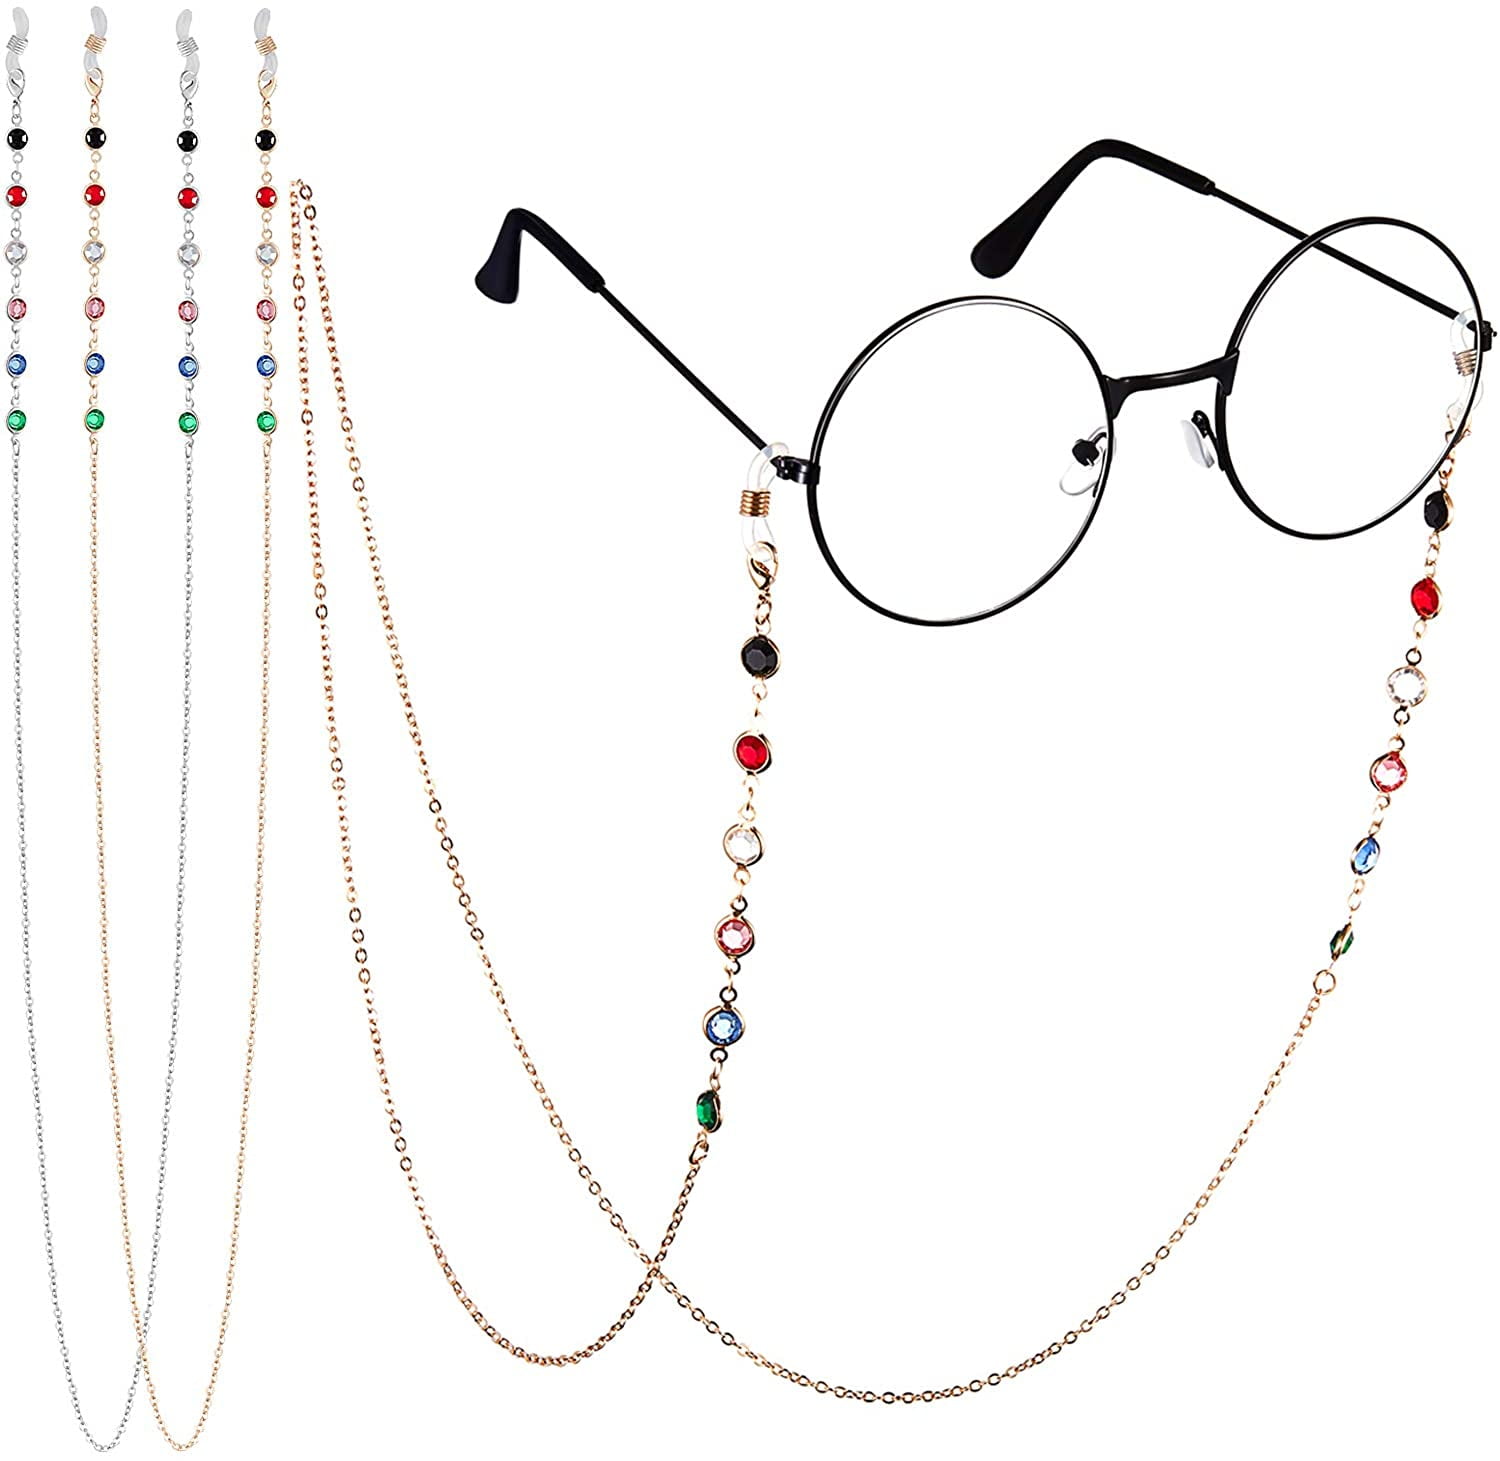 6 Pieces Beaded Eyeglass Chains Eyeglasses Strap Holder Beaded Eyewear Retainer Sunglasses Strap Reading Glasses Cords Lanyards for Women 